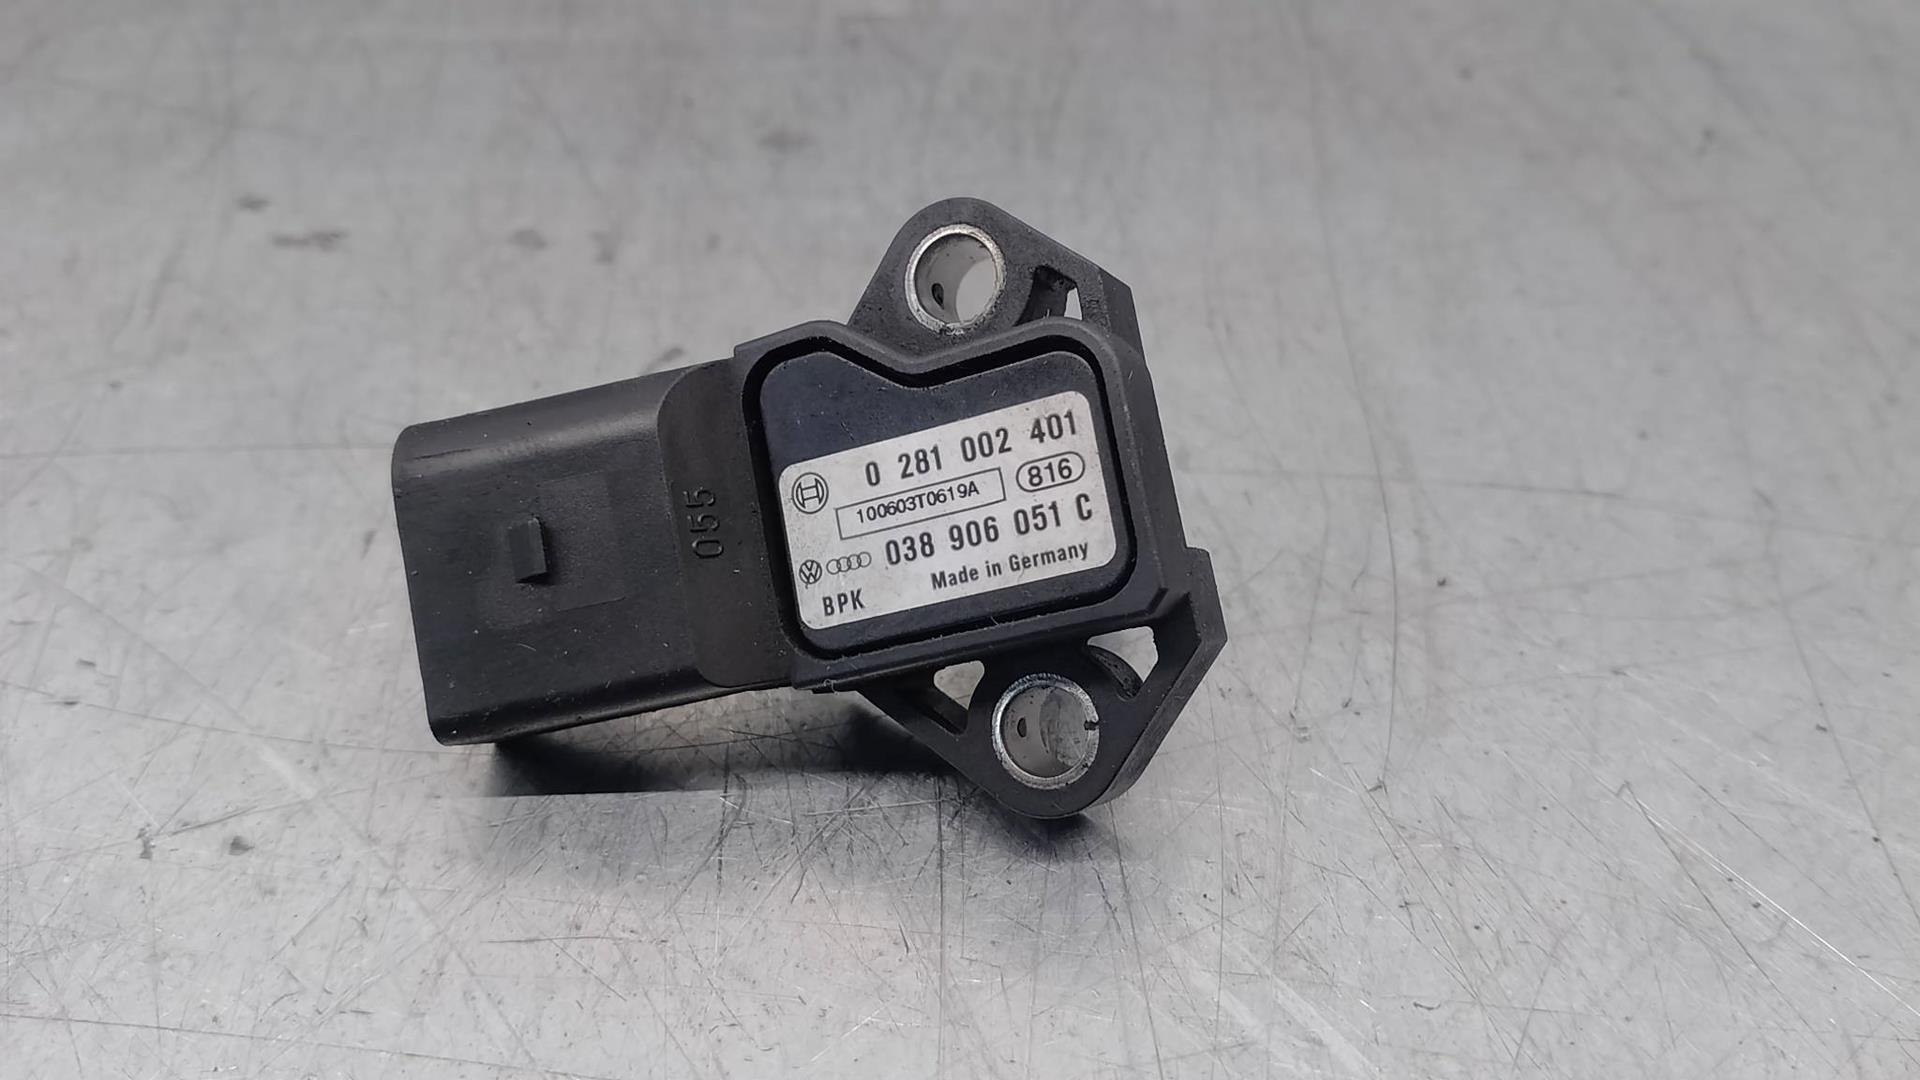 SEAT Exeo 1 generation (2009-2012) Other Control Units 038906051C, 0281002401 23757672